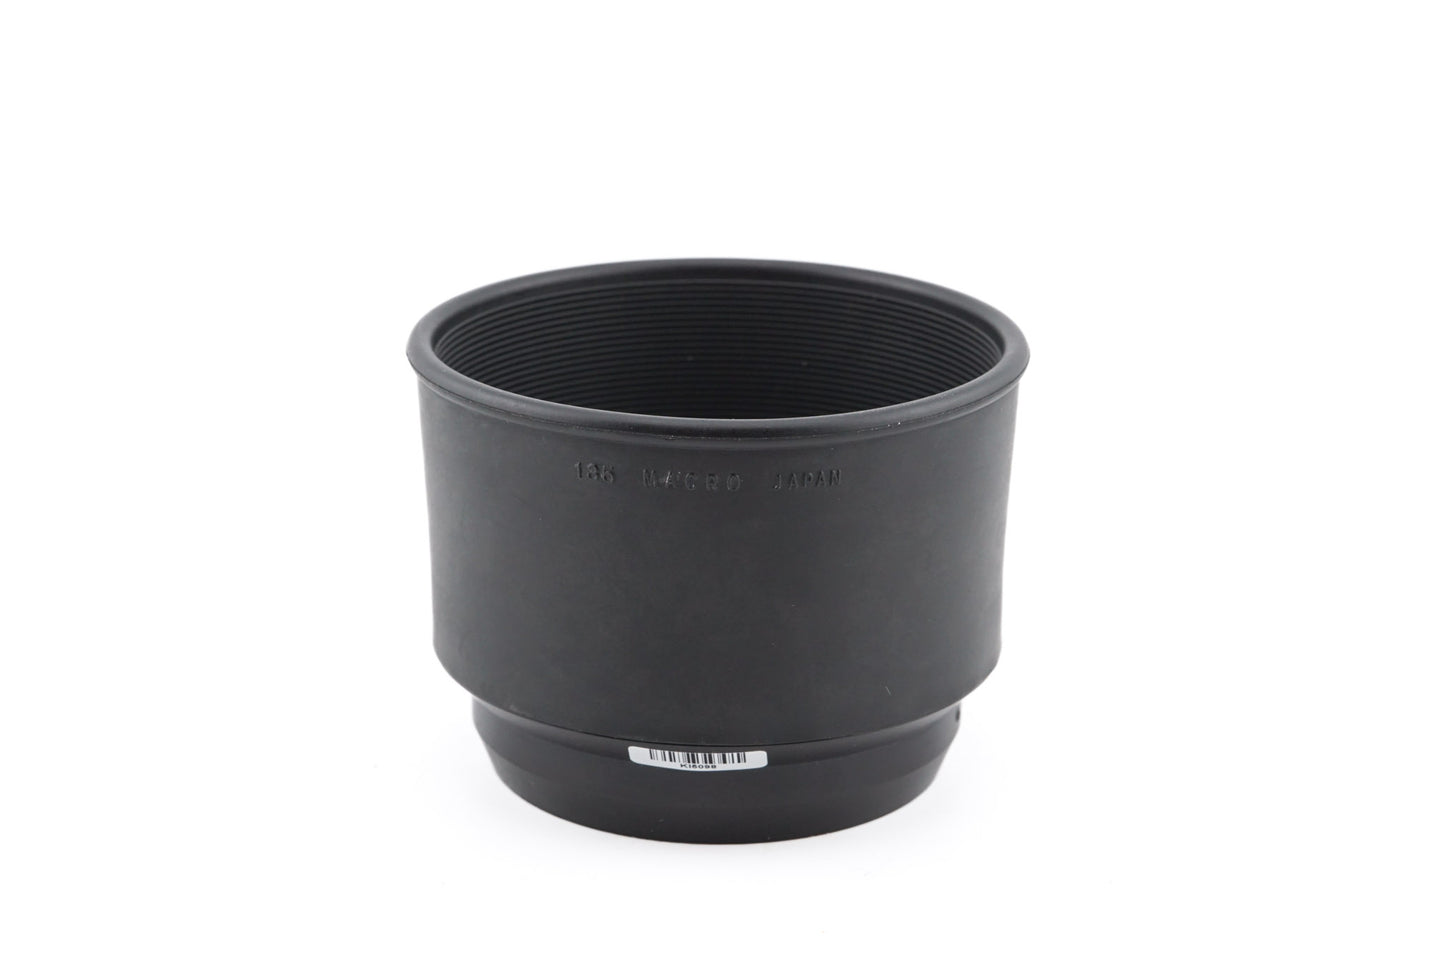 Olympus Rubber Lens Hood For 135mm f4.5 Macro - Accessory